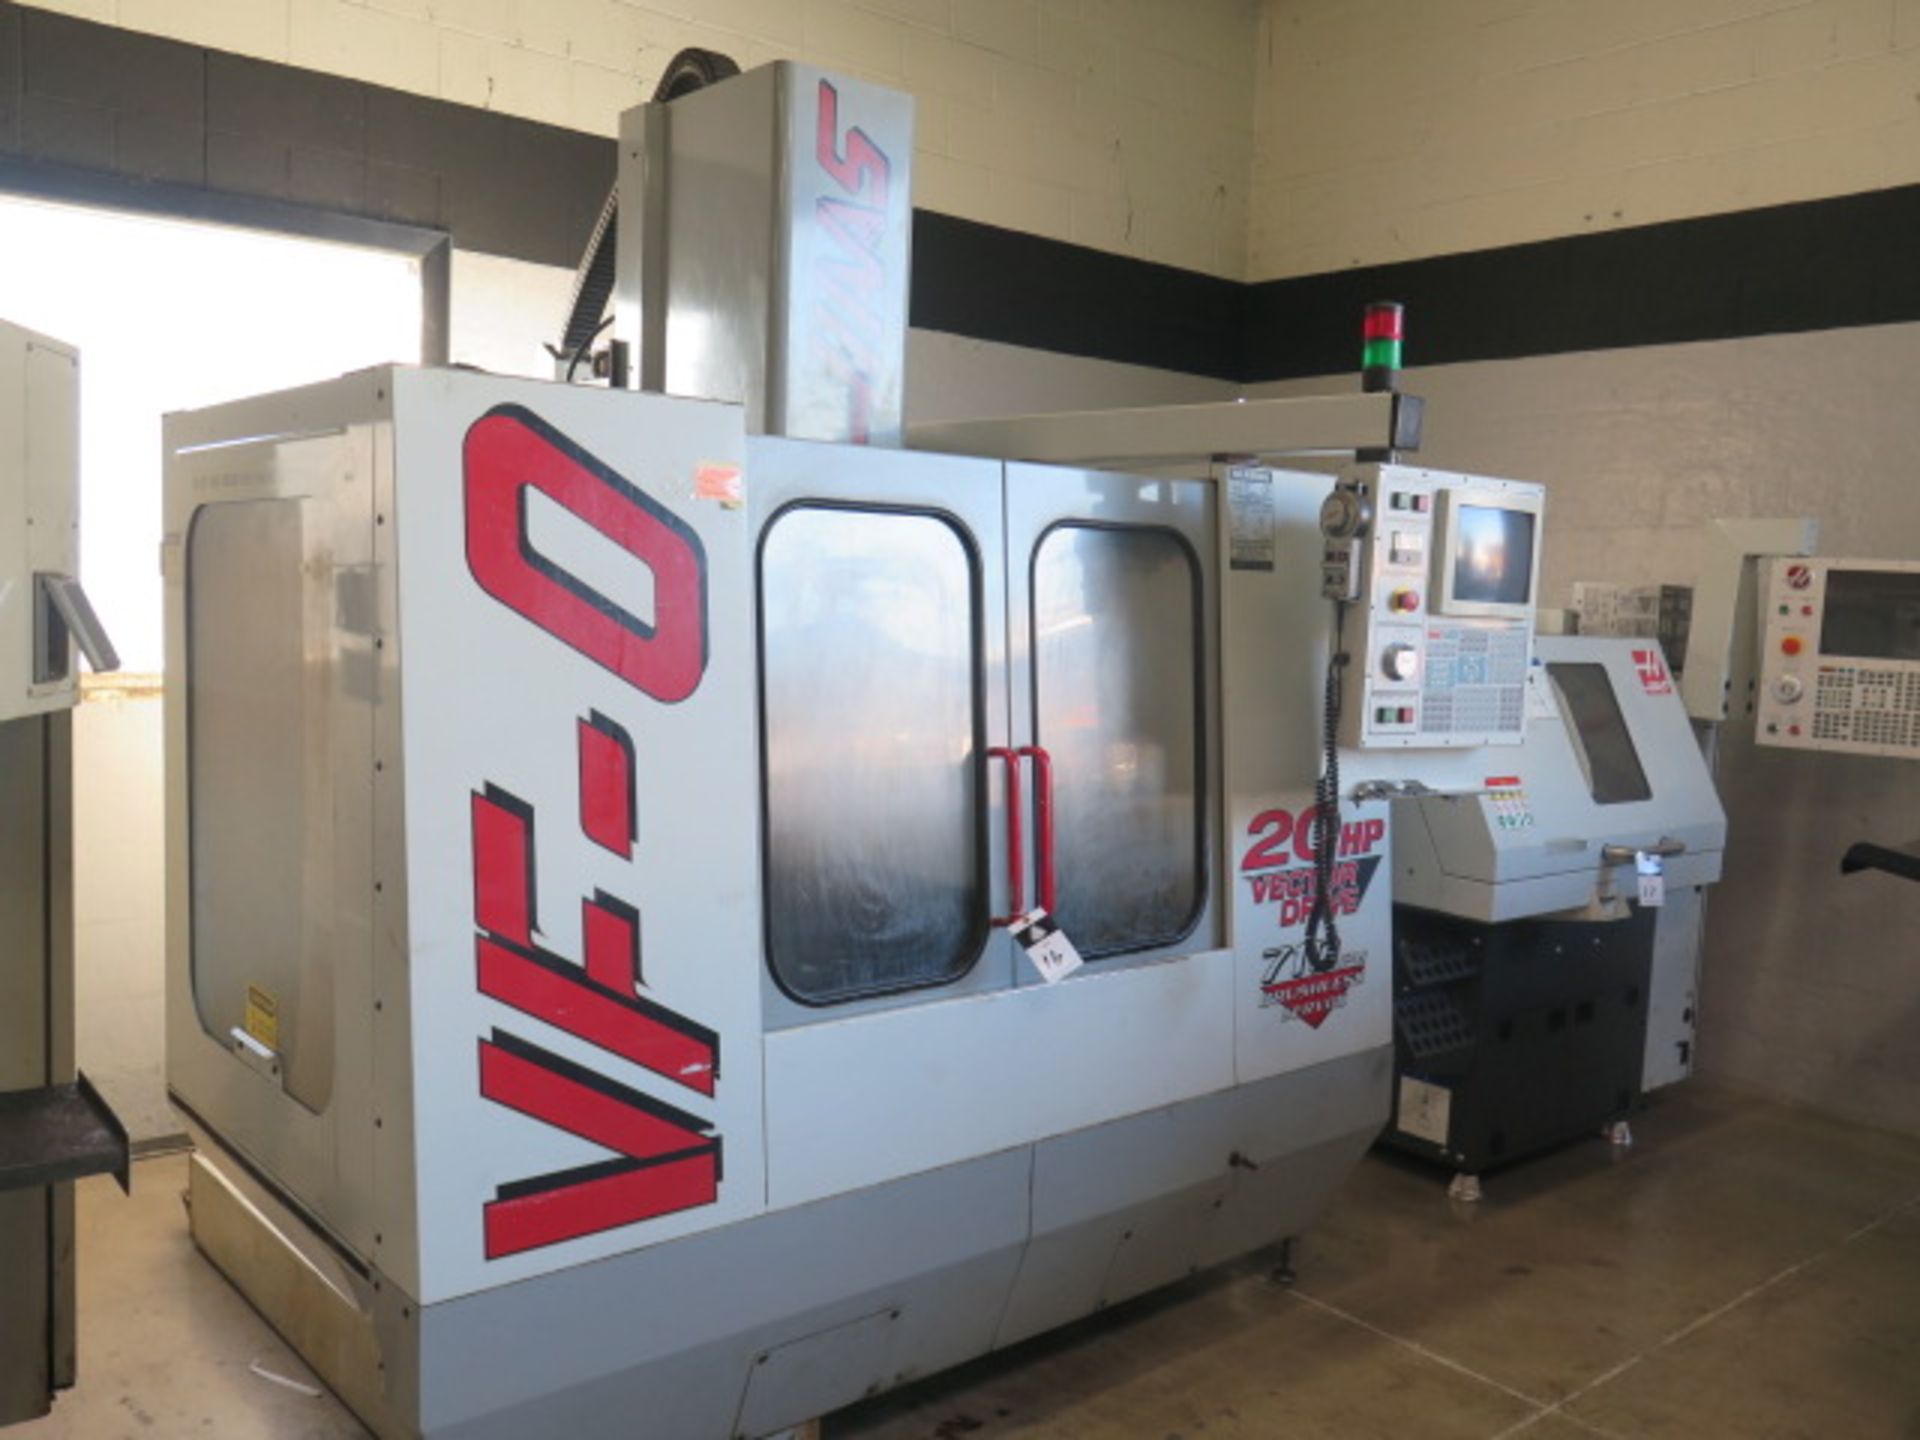 1991 Haas VF-0 4-Axis CNC VMC s/n 14019 w/ Haas Controls, Hand Wheel, 20 ATE, SOLD AS IS - Image 2 of 14